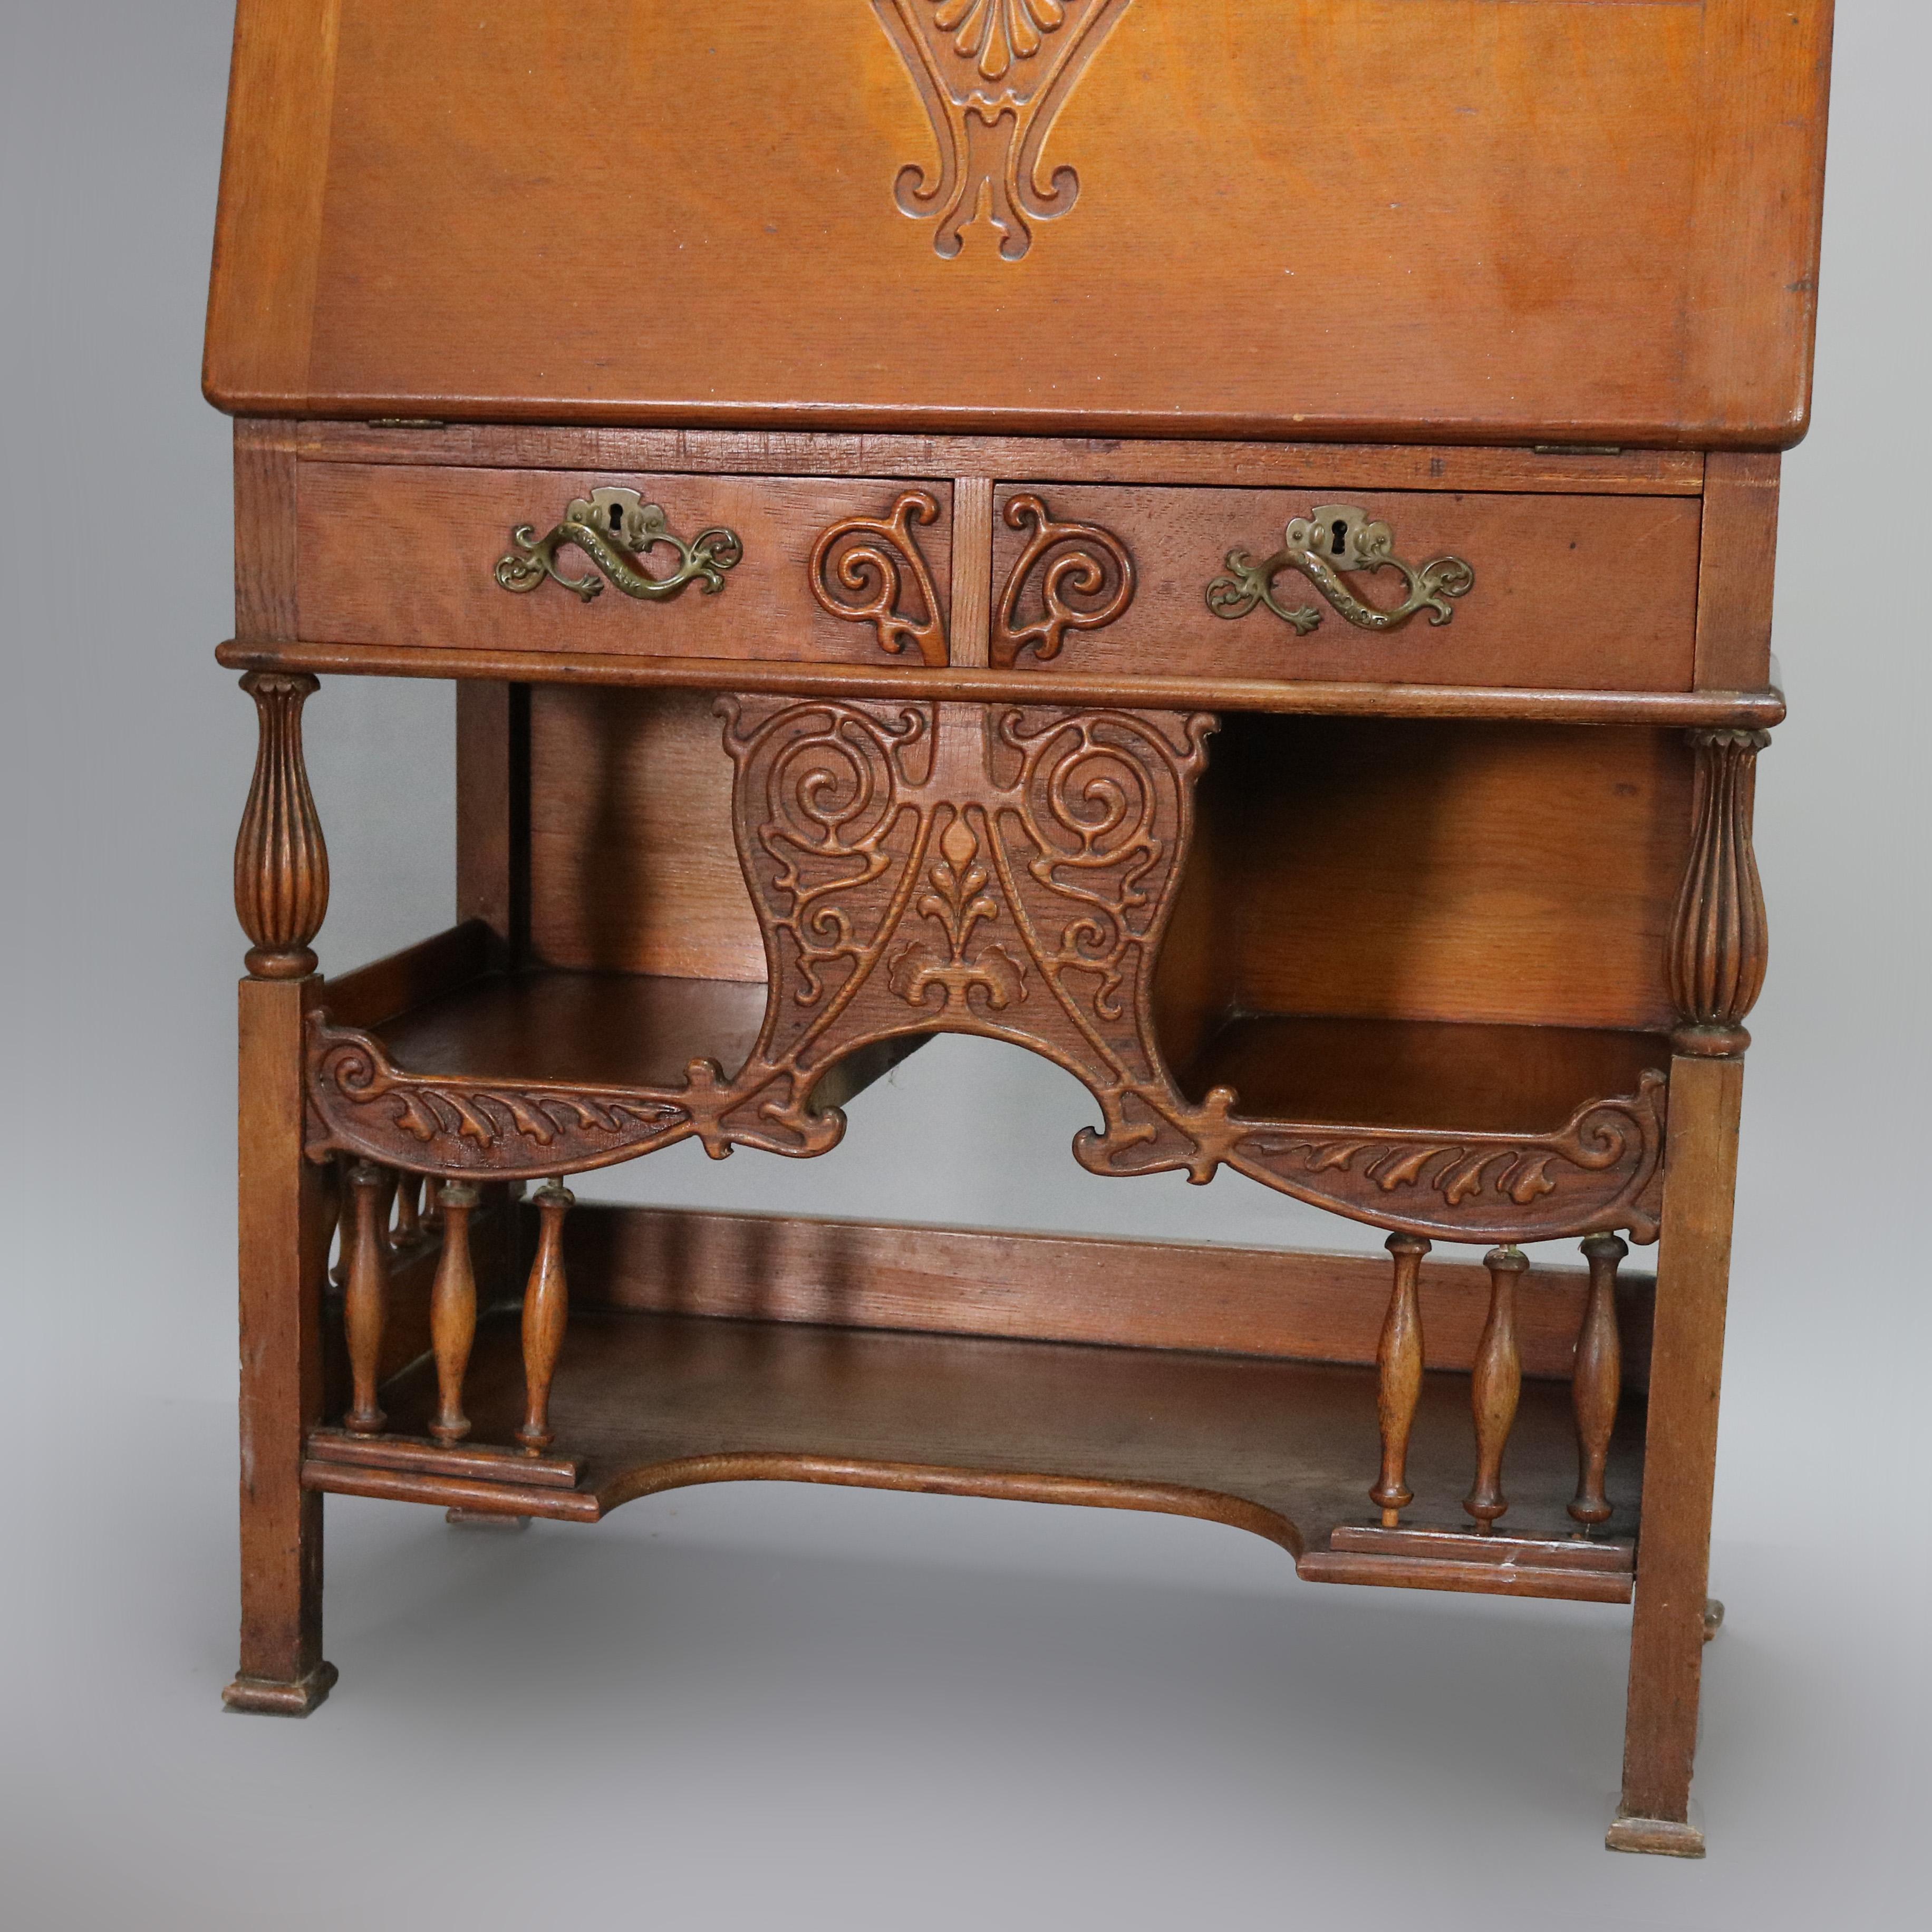 An antique RJ Horner School Cowboy desk offers oak construction with gallery having carved scroll rail over mirrored upper with central drawer and flanking cabinets over slant front desk opening to writing surface and pigeon holes surmounting lower